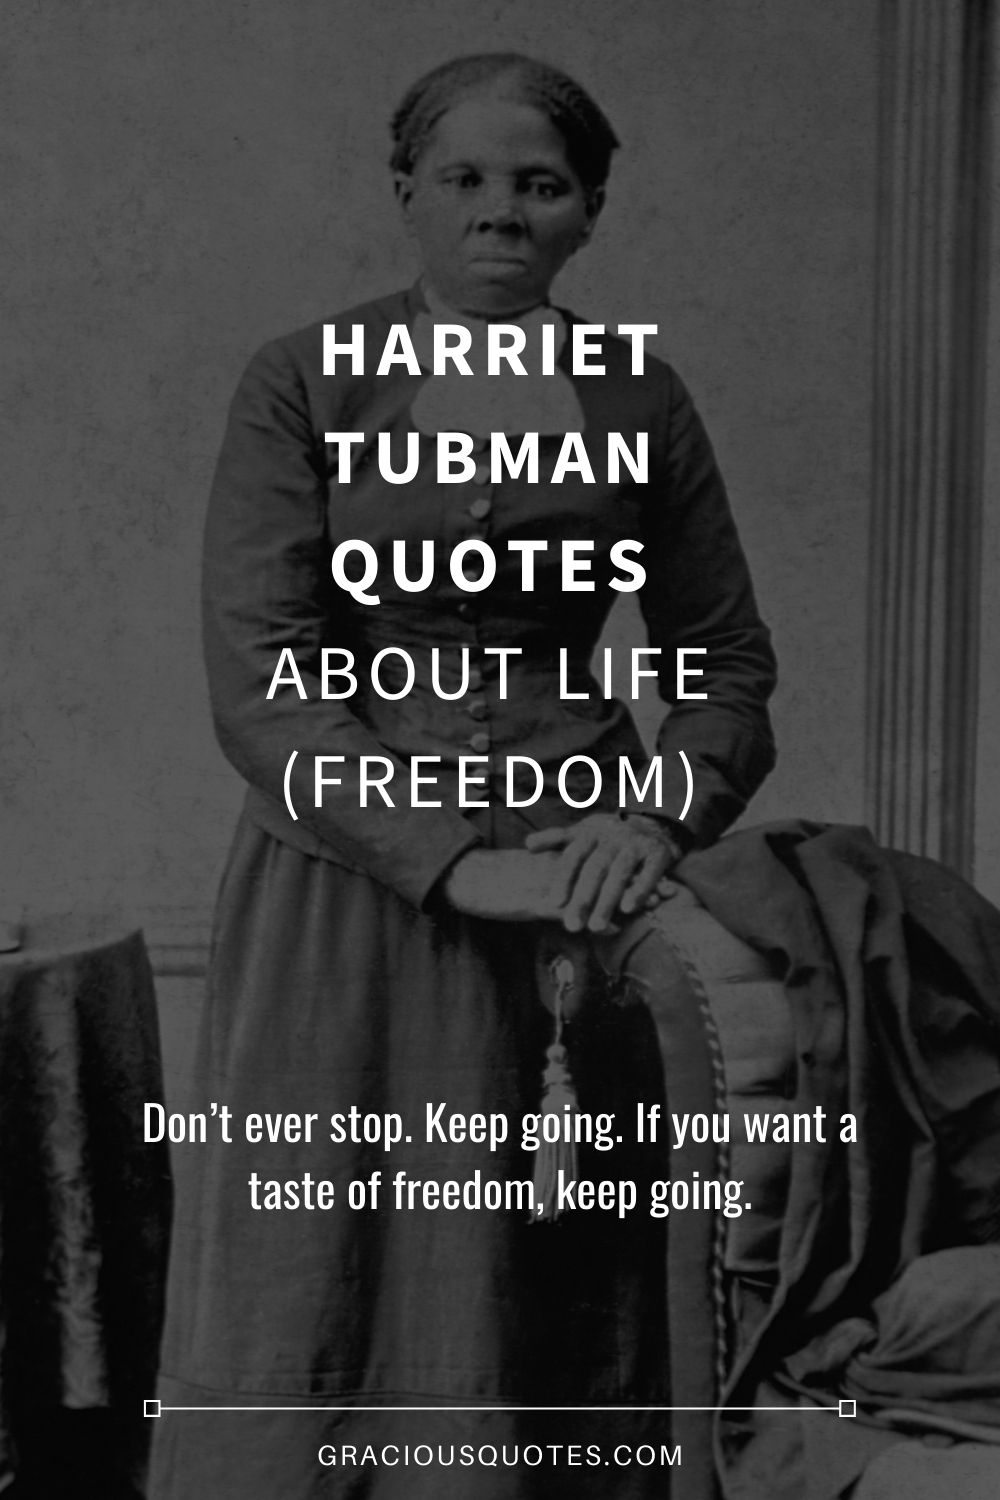 Harriet Tubman Quotes About Life (FREEDOM) - Gracious Quotes